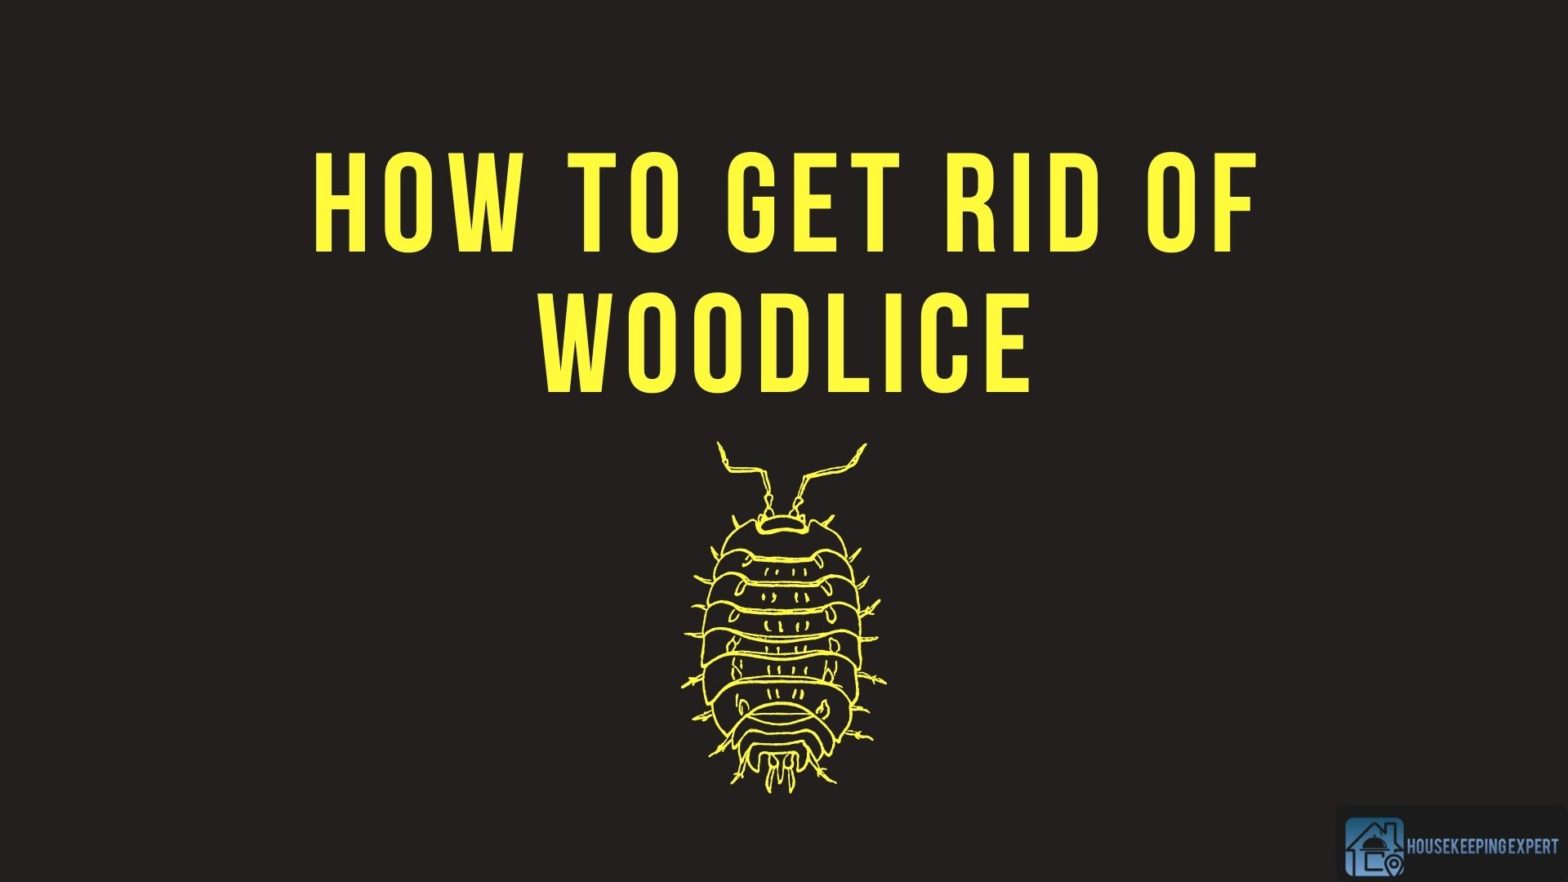 How To Get Rid Of Woodlice